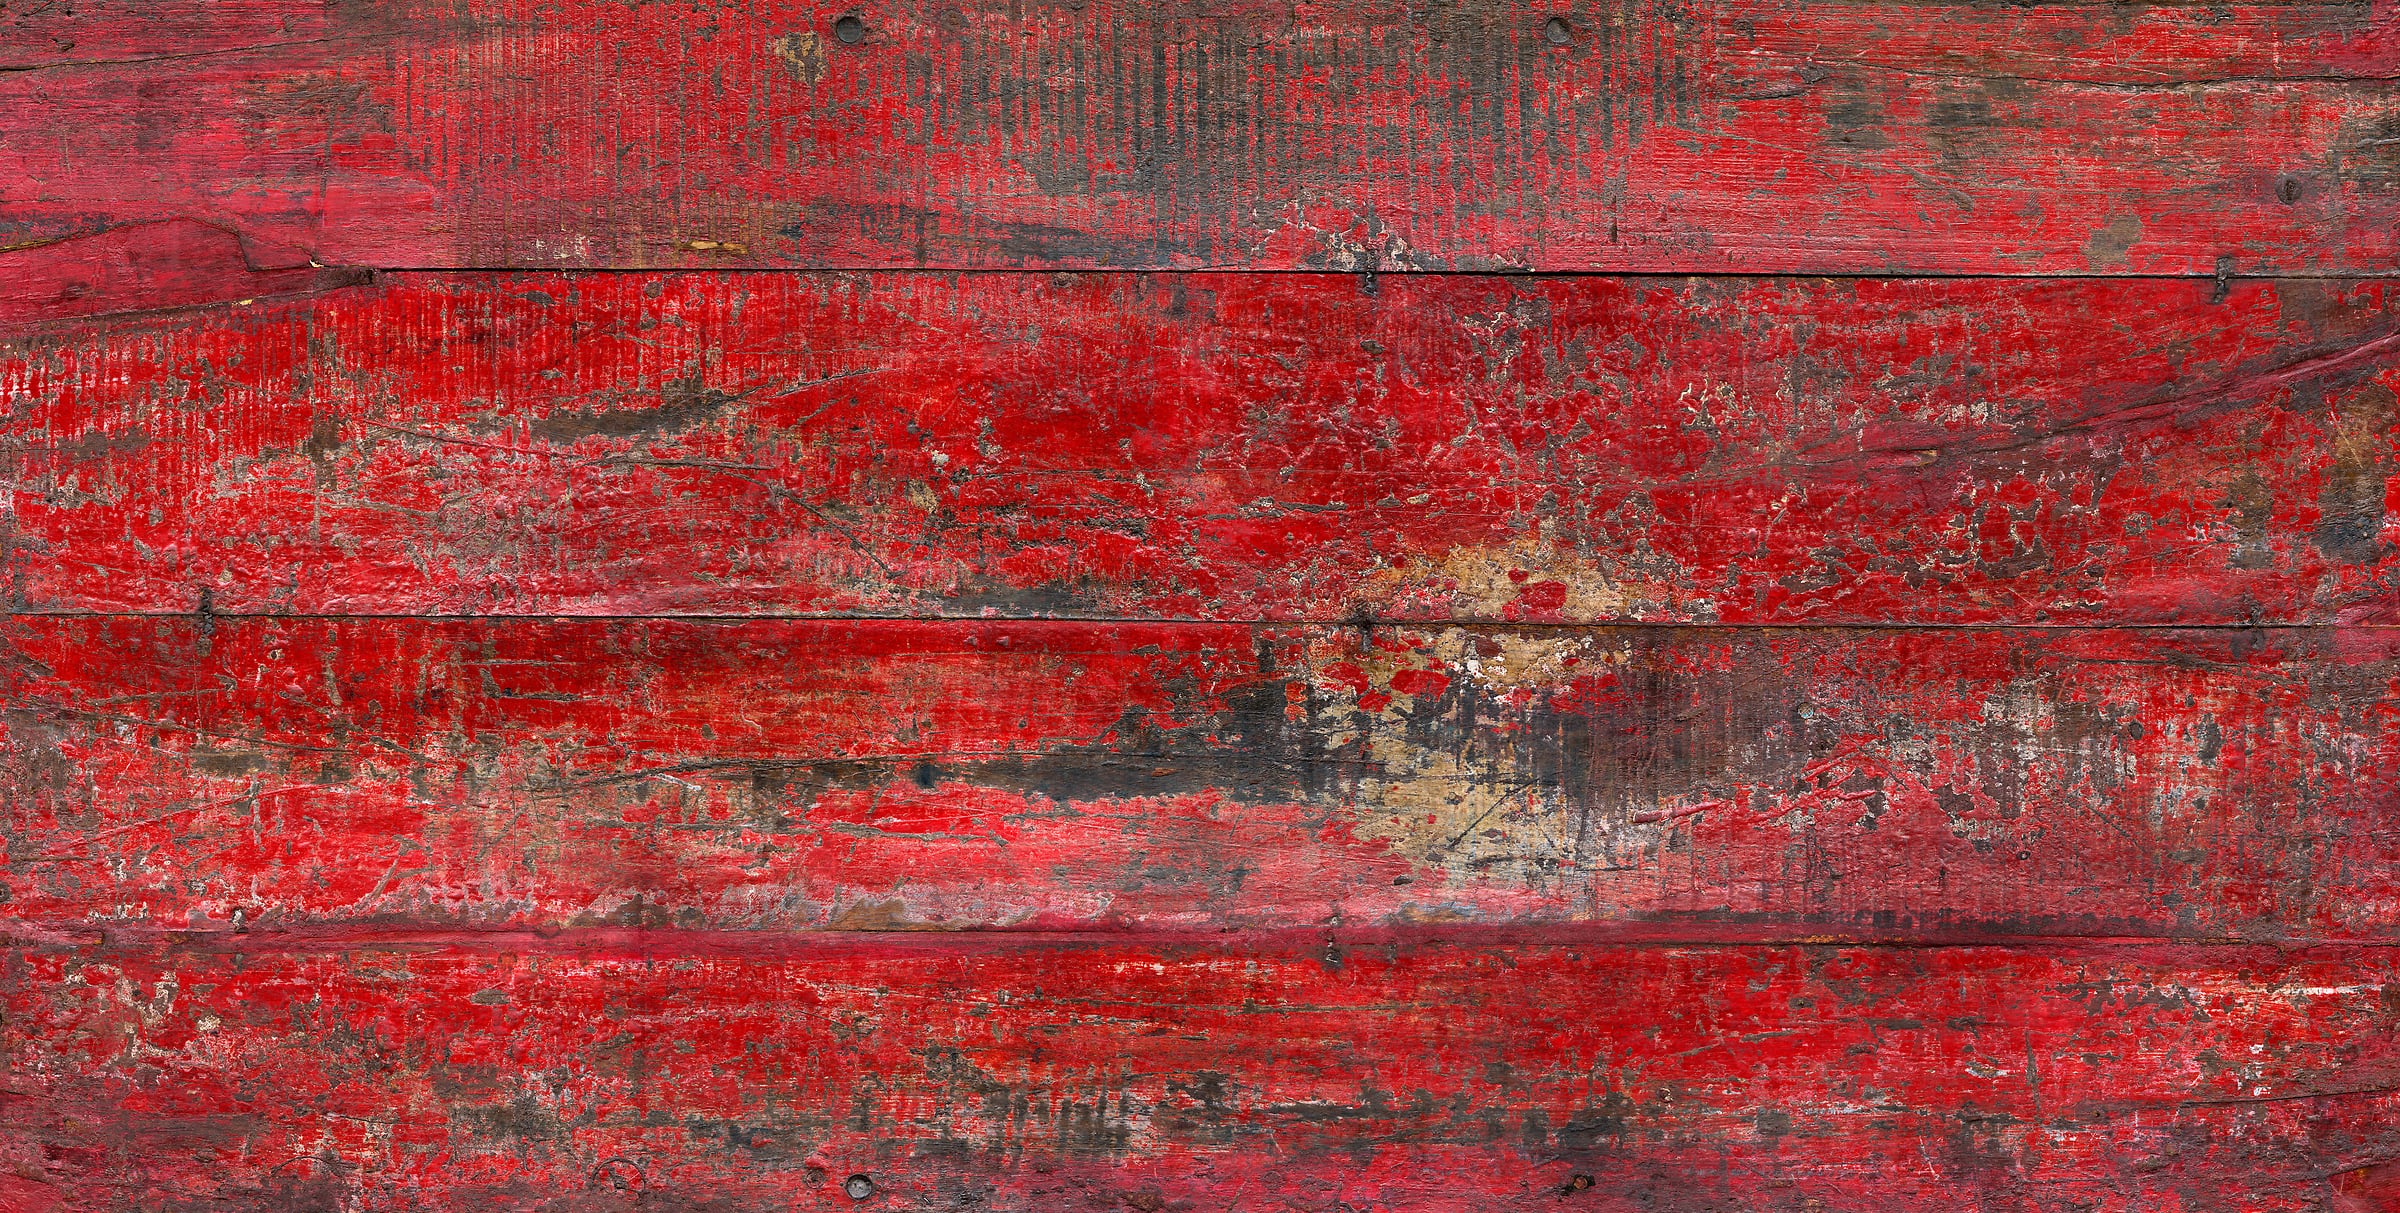 3,385 megapixels! An ultra-high-resolution texture photo file of an old wooden red distressed table; gigapixel photograph created by David Lineton.